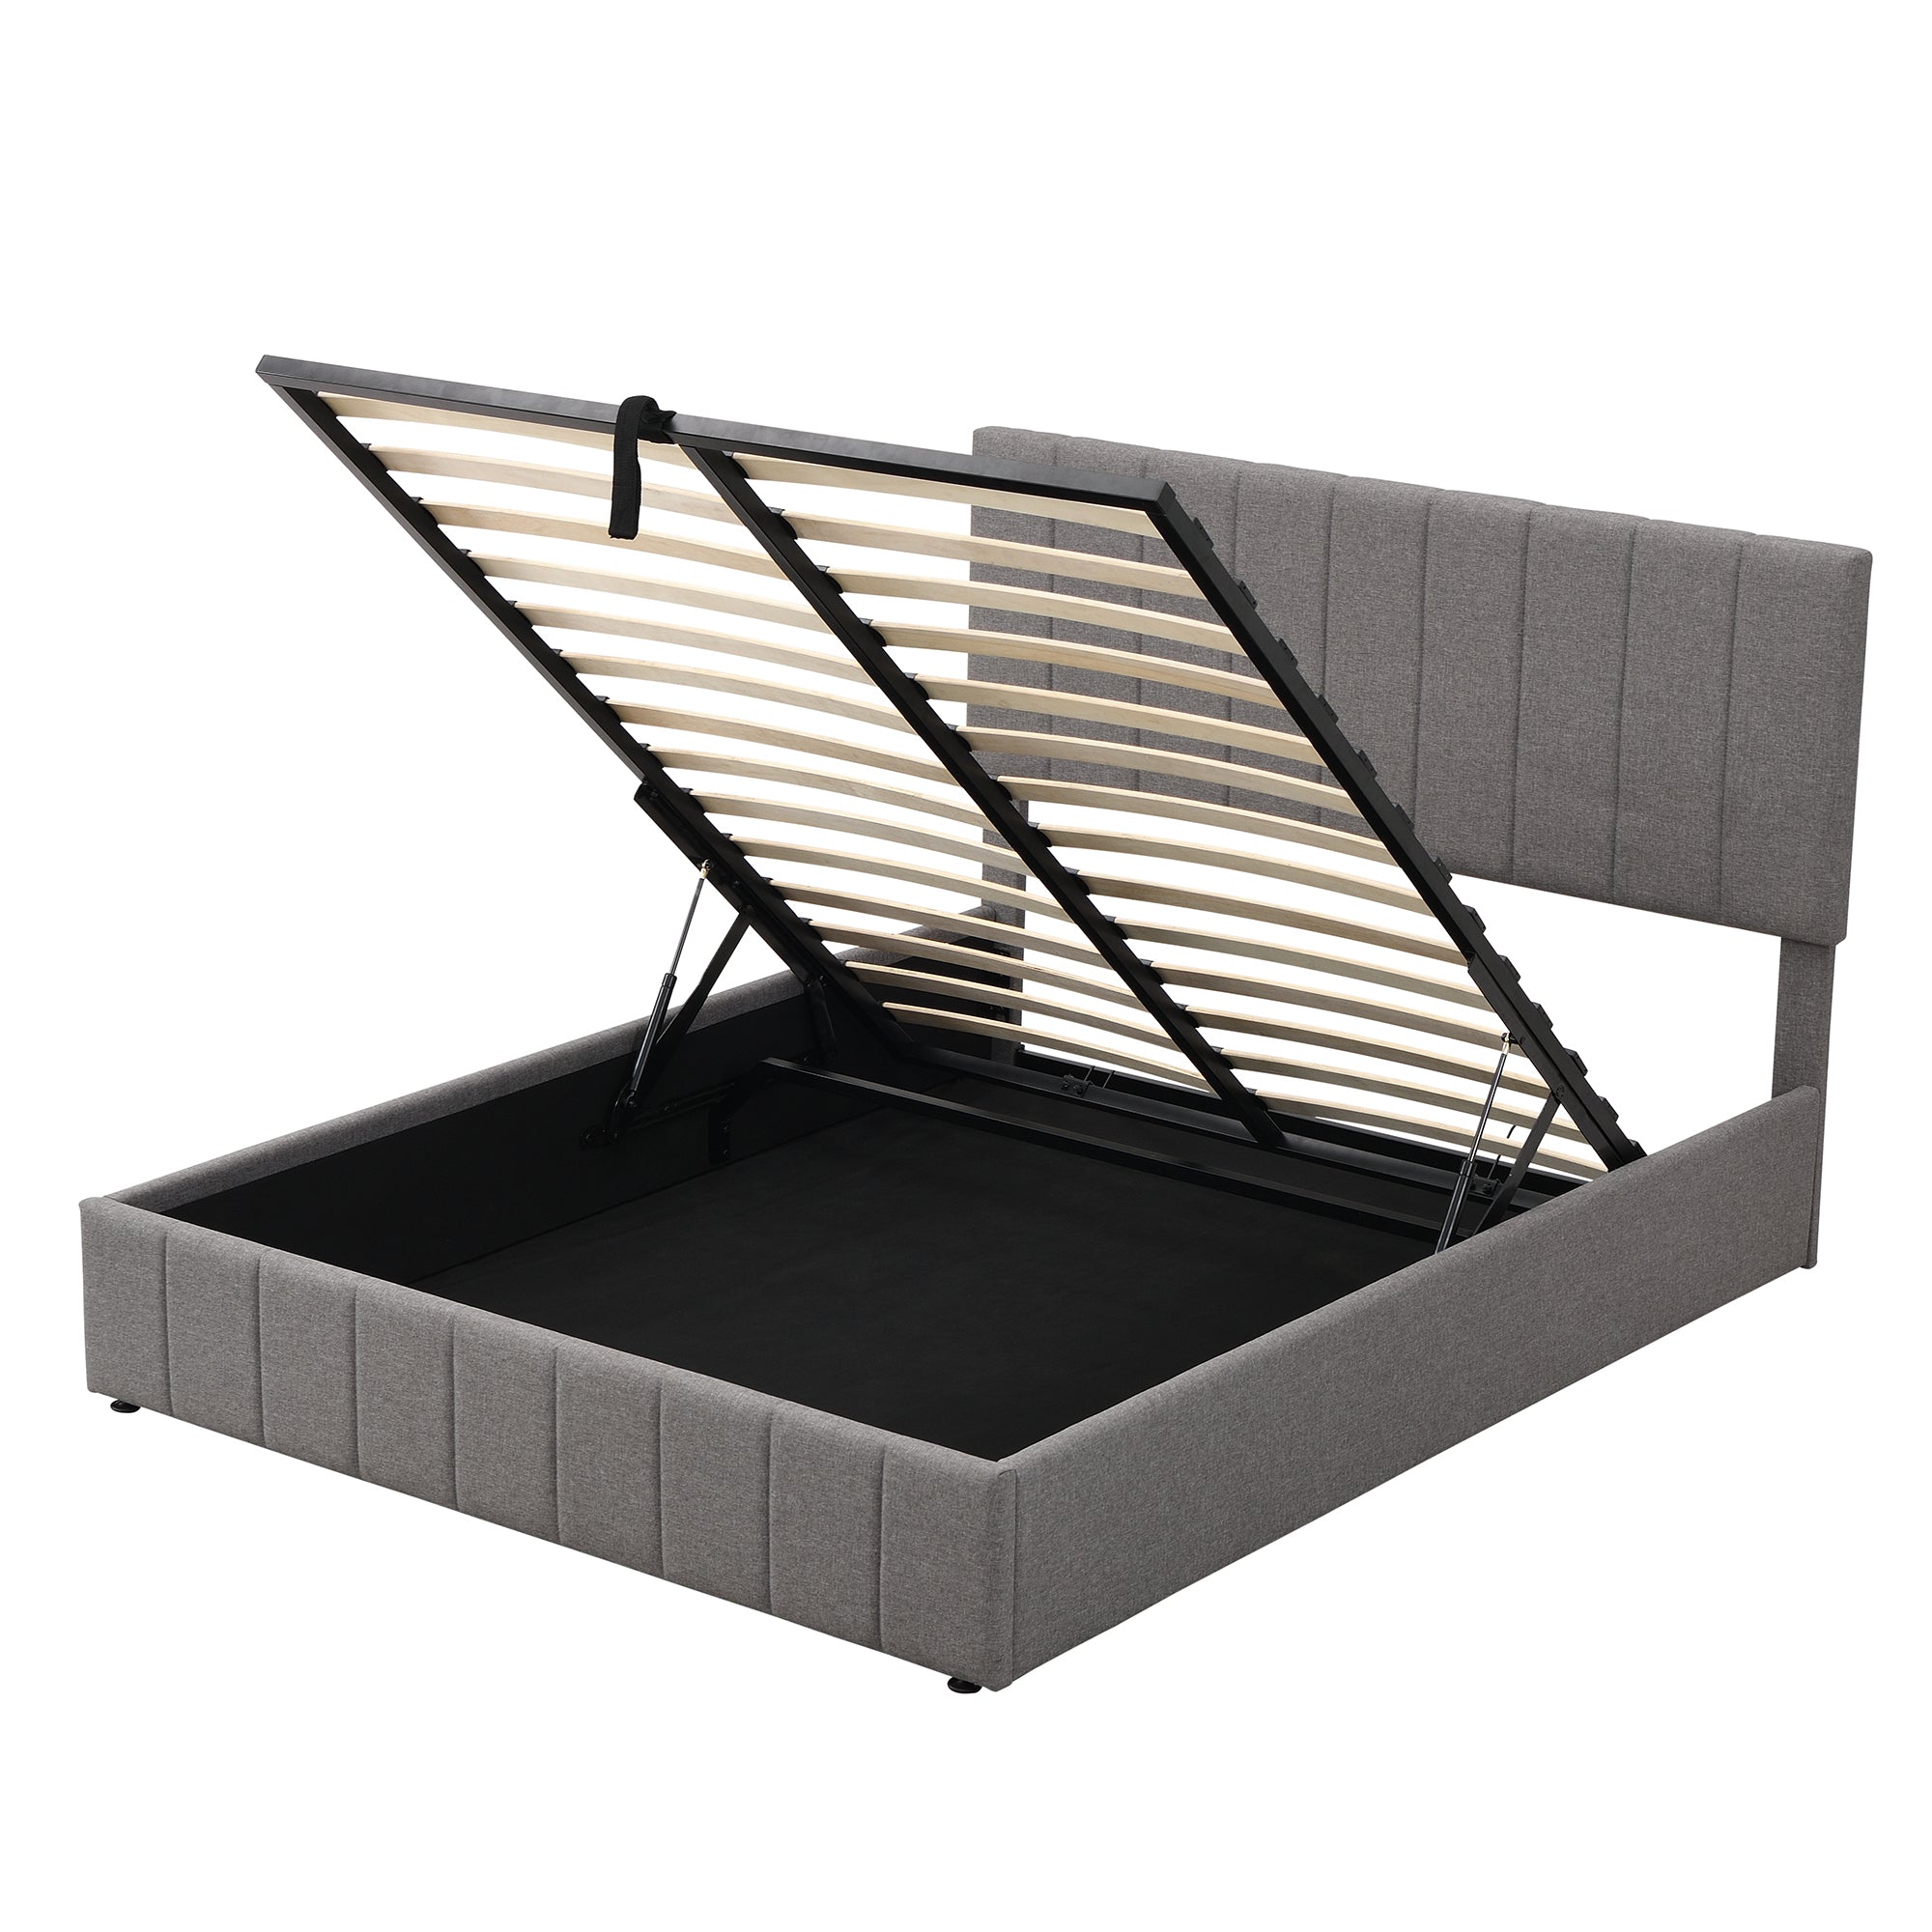 Queen Size Upholstered Platform Bed with a Hydraulic Storage System - Gray By: Alabama Beds